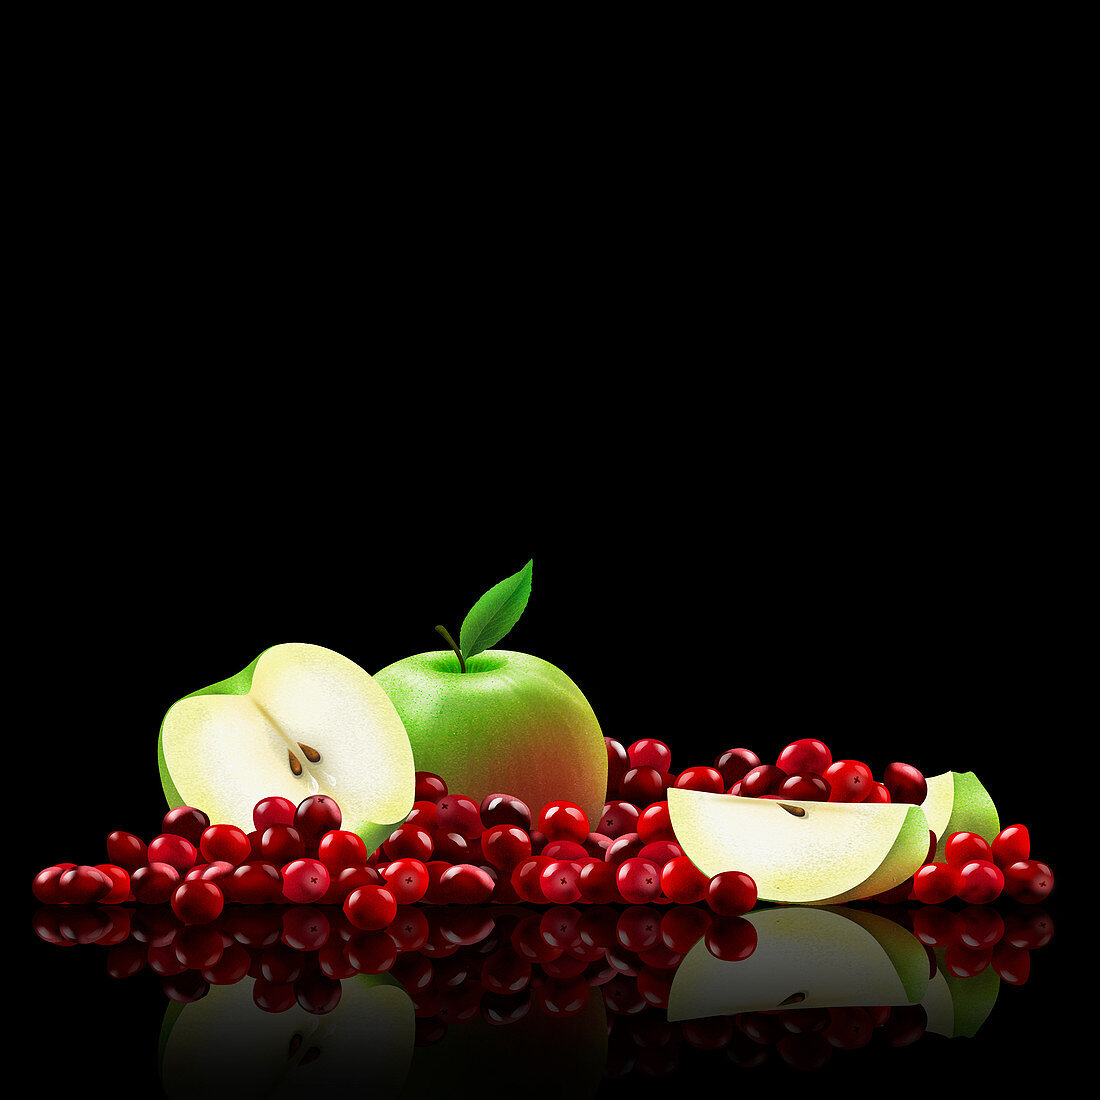 Fresh apples and cranberries, illustration